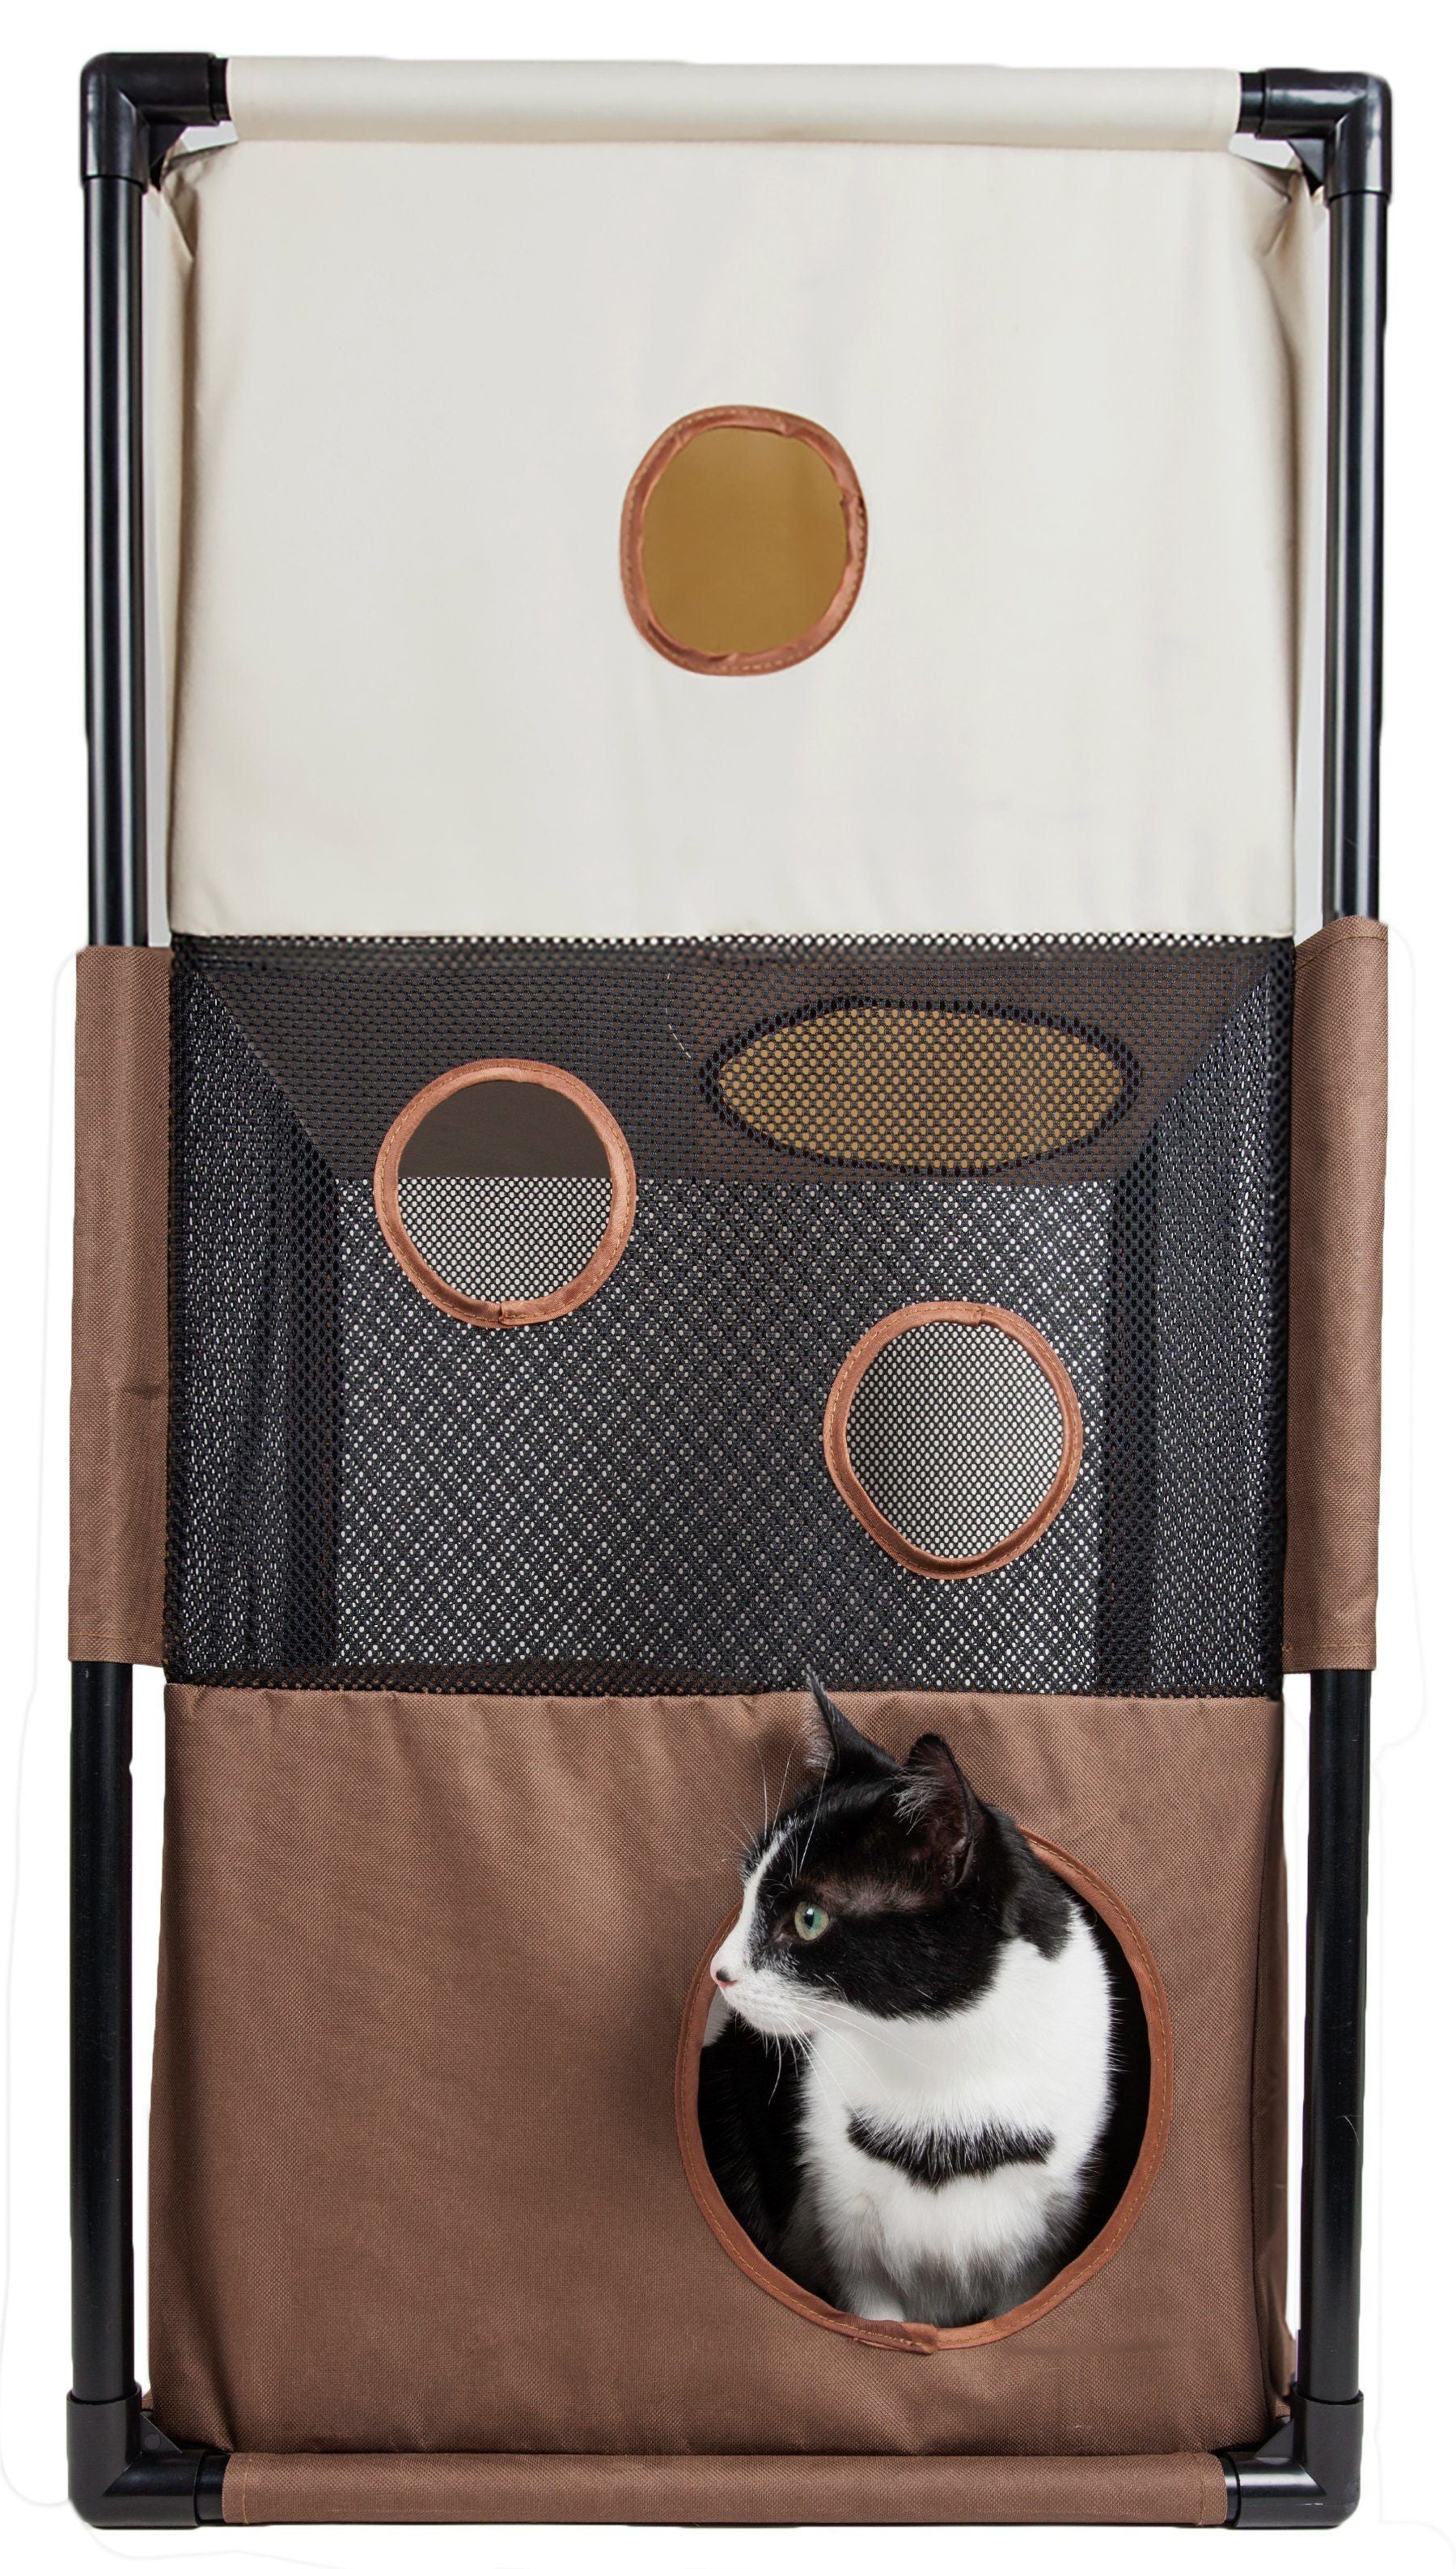 Pet Life ® 'Kitty-Square' Collapsible Travel Interactive Kitty Cat Tree Maze House Lounger Tunnel Lounge Khaki, Brown 